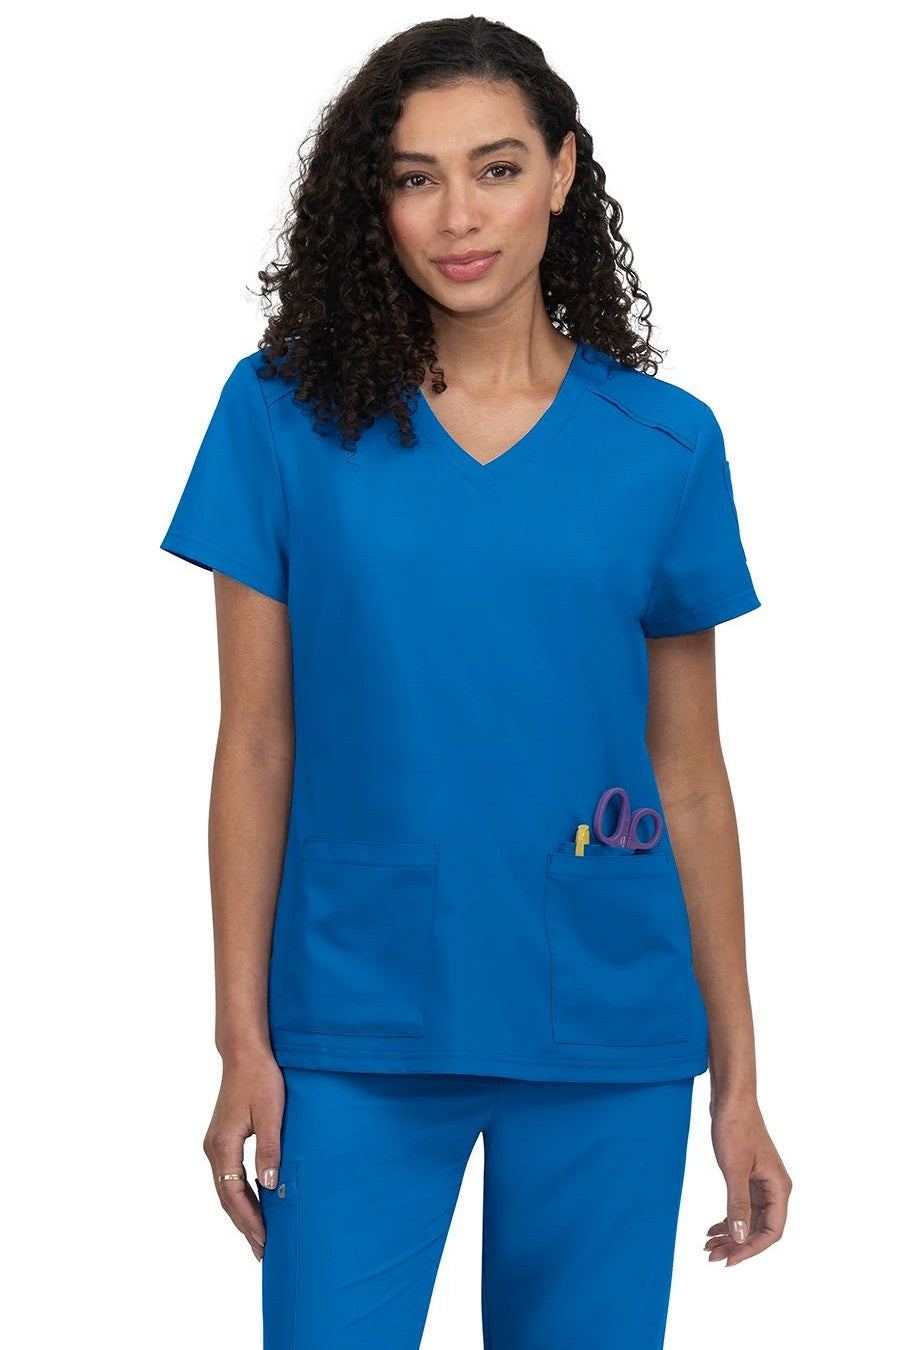 koi Scrub Top Cureology Cardi in Royal at Parker's Clothing and Shoes.